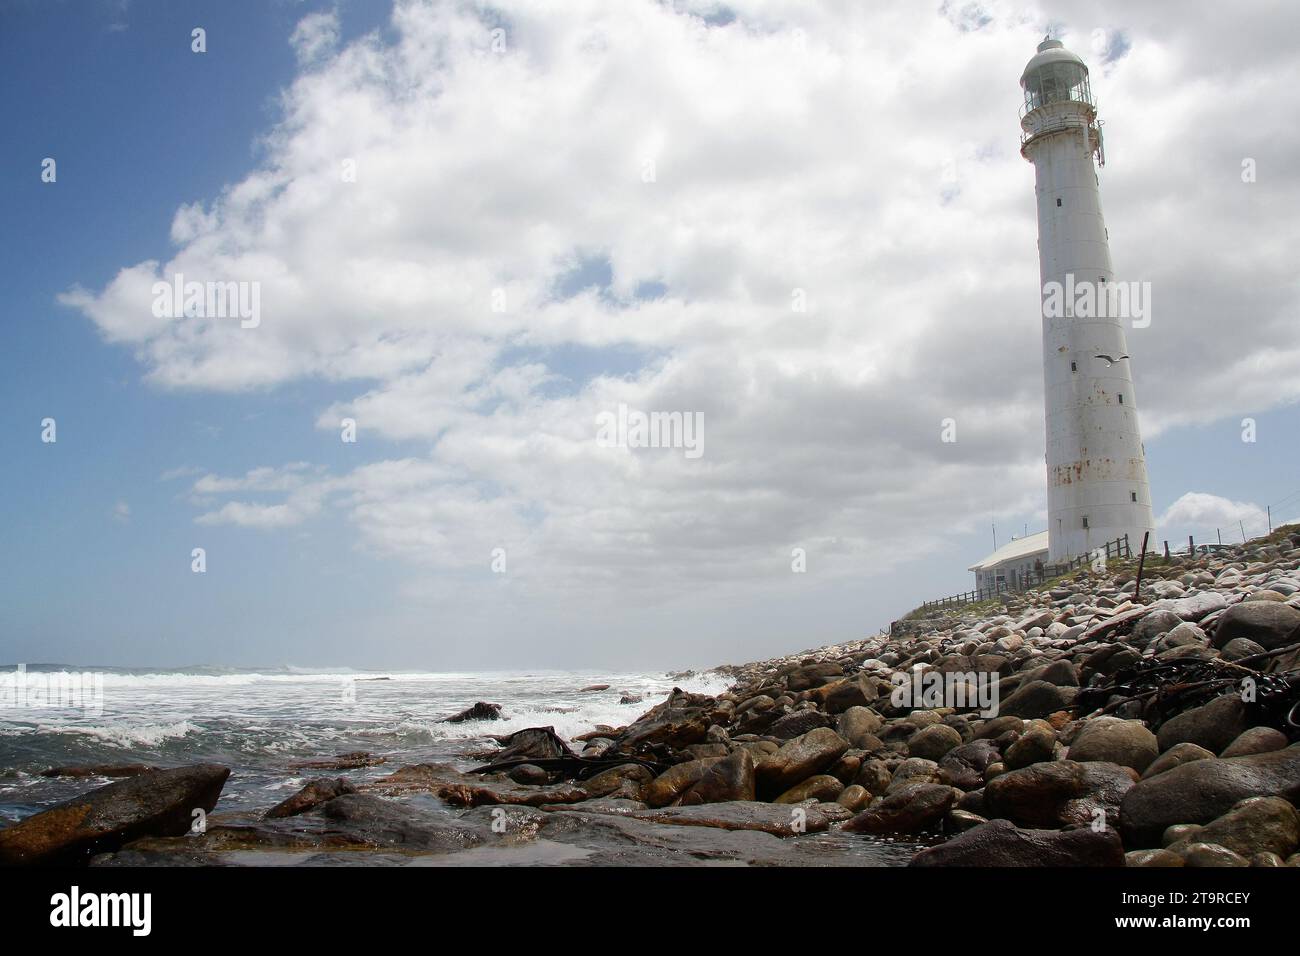 A general view of the Slangkop Lighthouse near Kommetjie outside Cape Town, South Africa Stock Photo